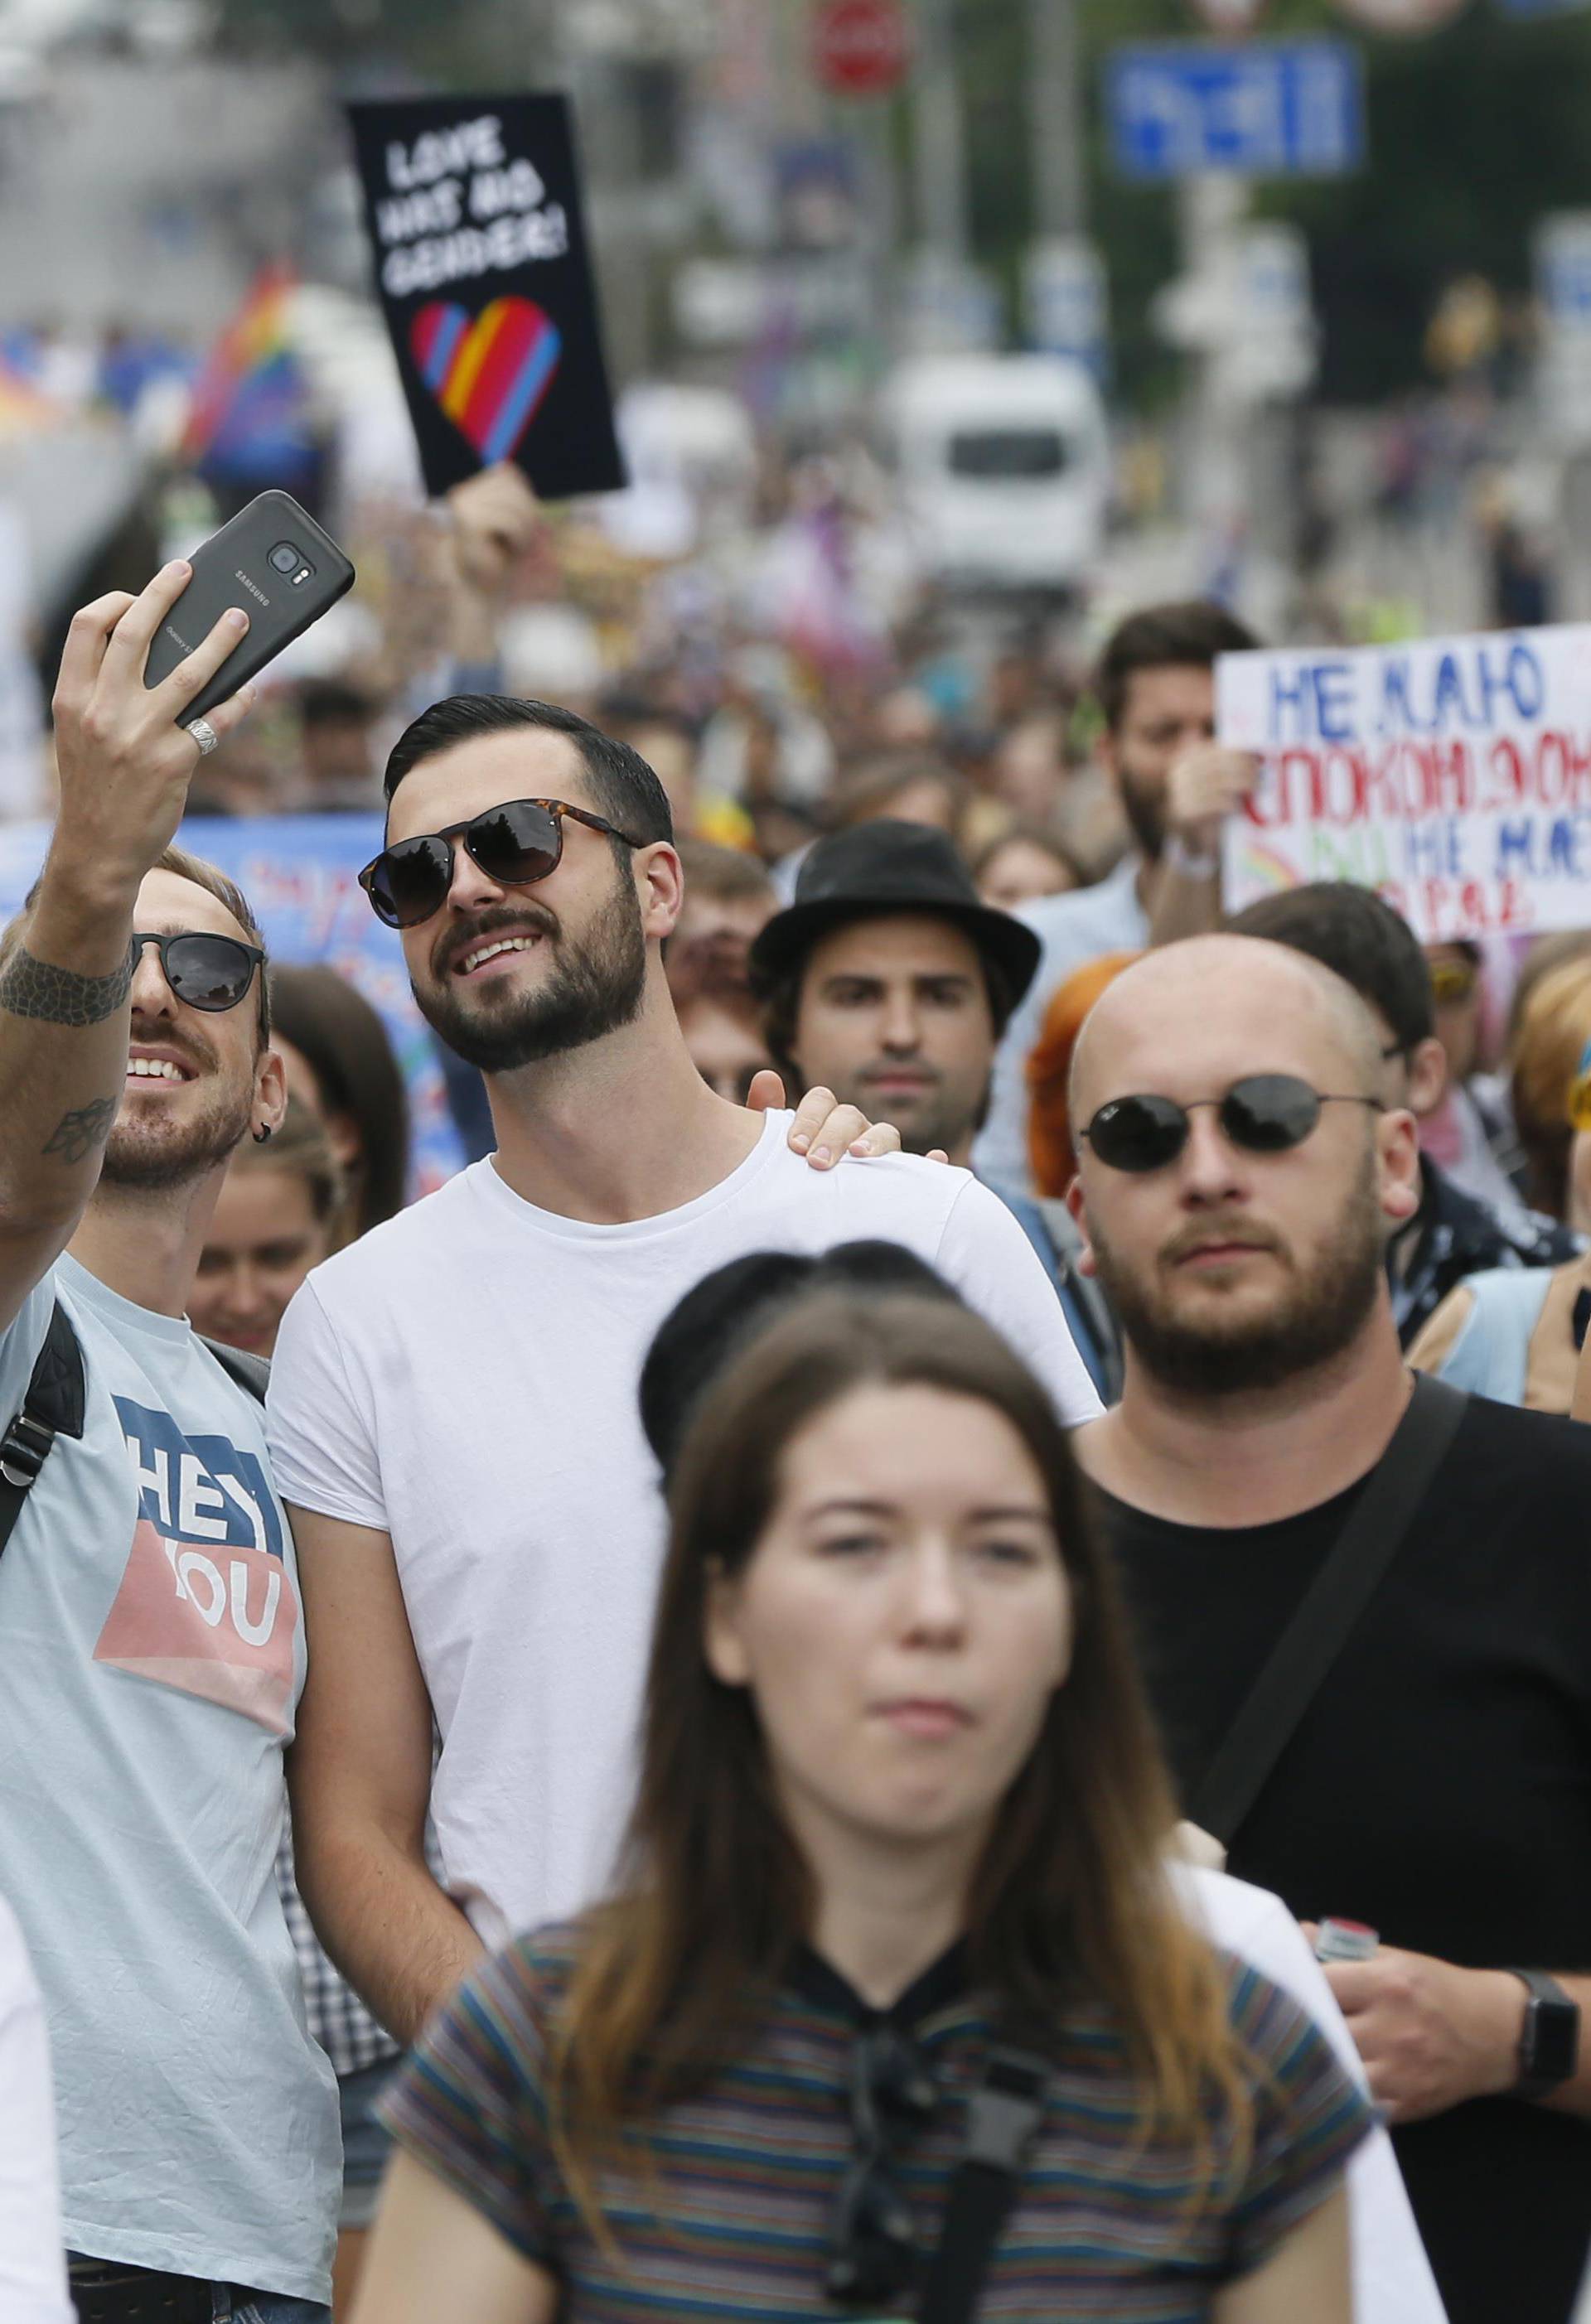 Participants take a selfie during the Equality March in Kiev